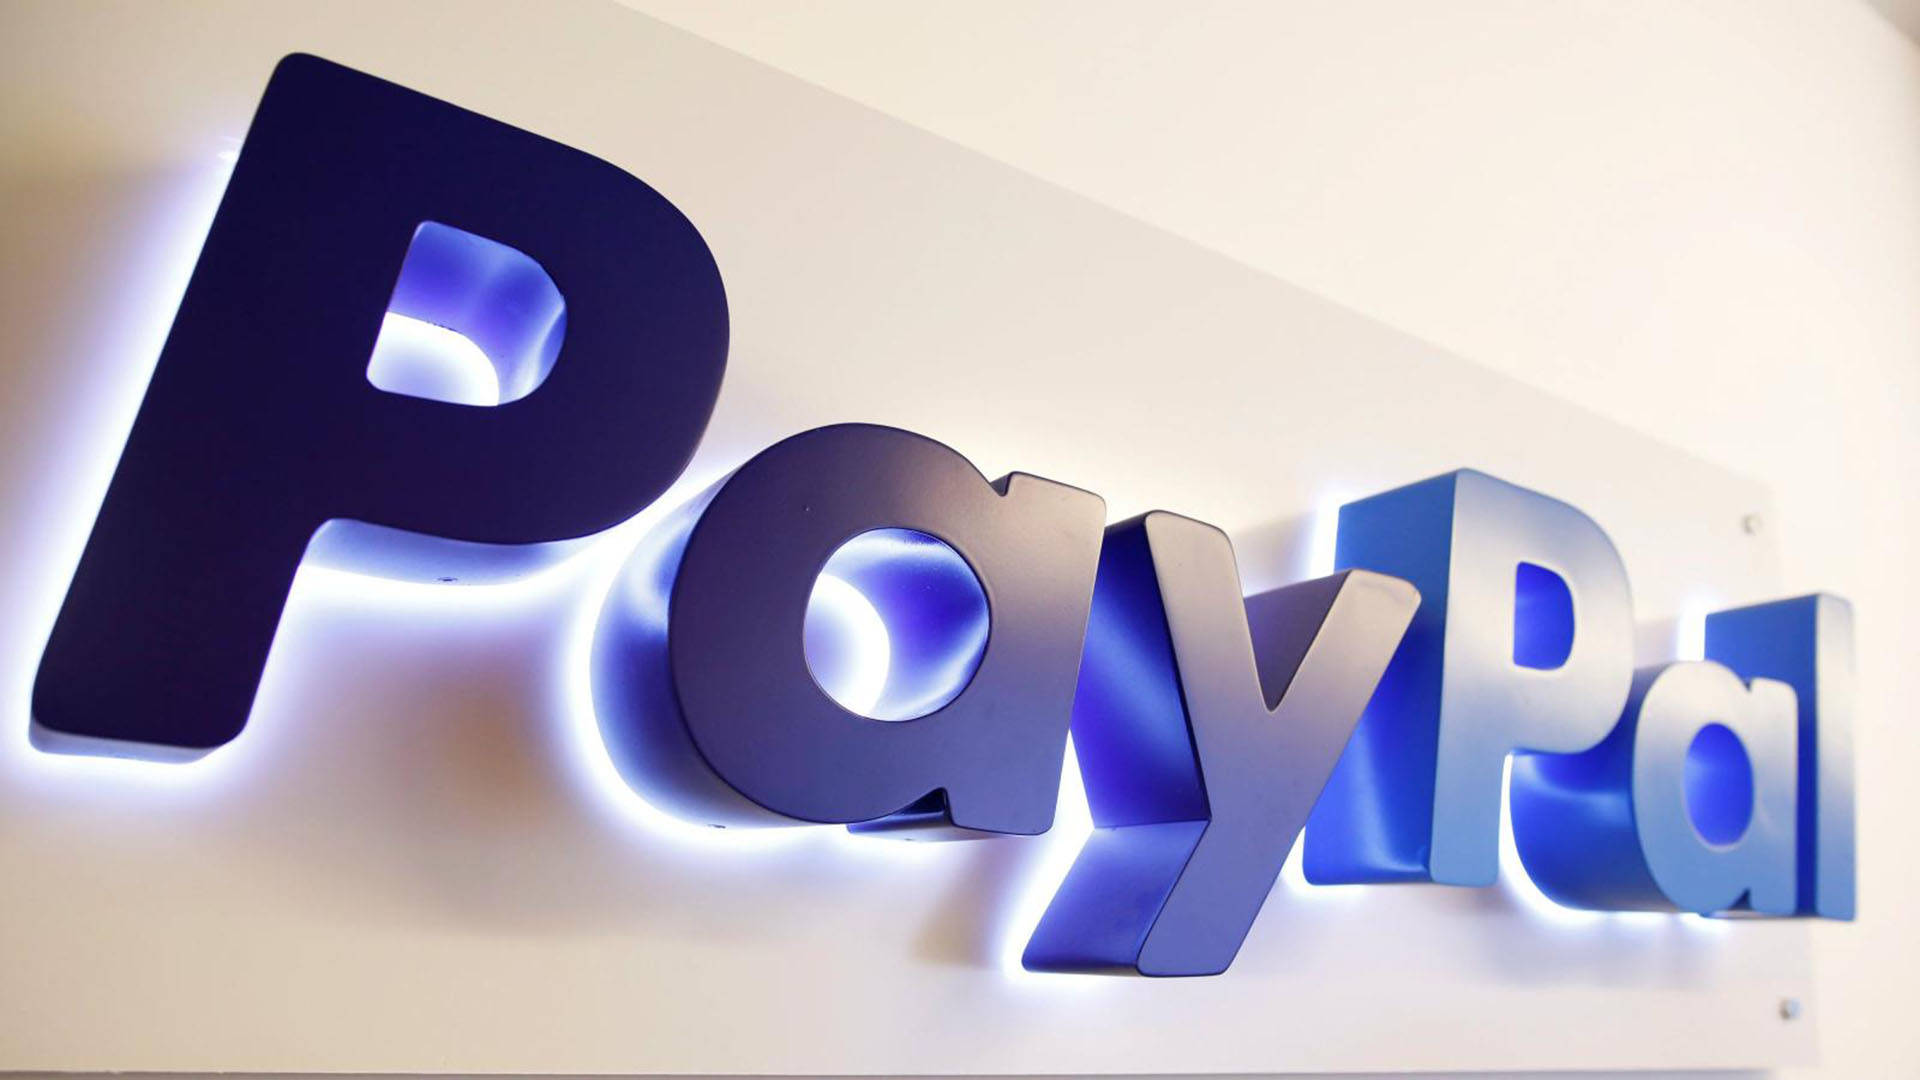 Paypal Blue Light Sign Background